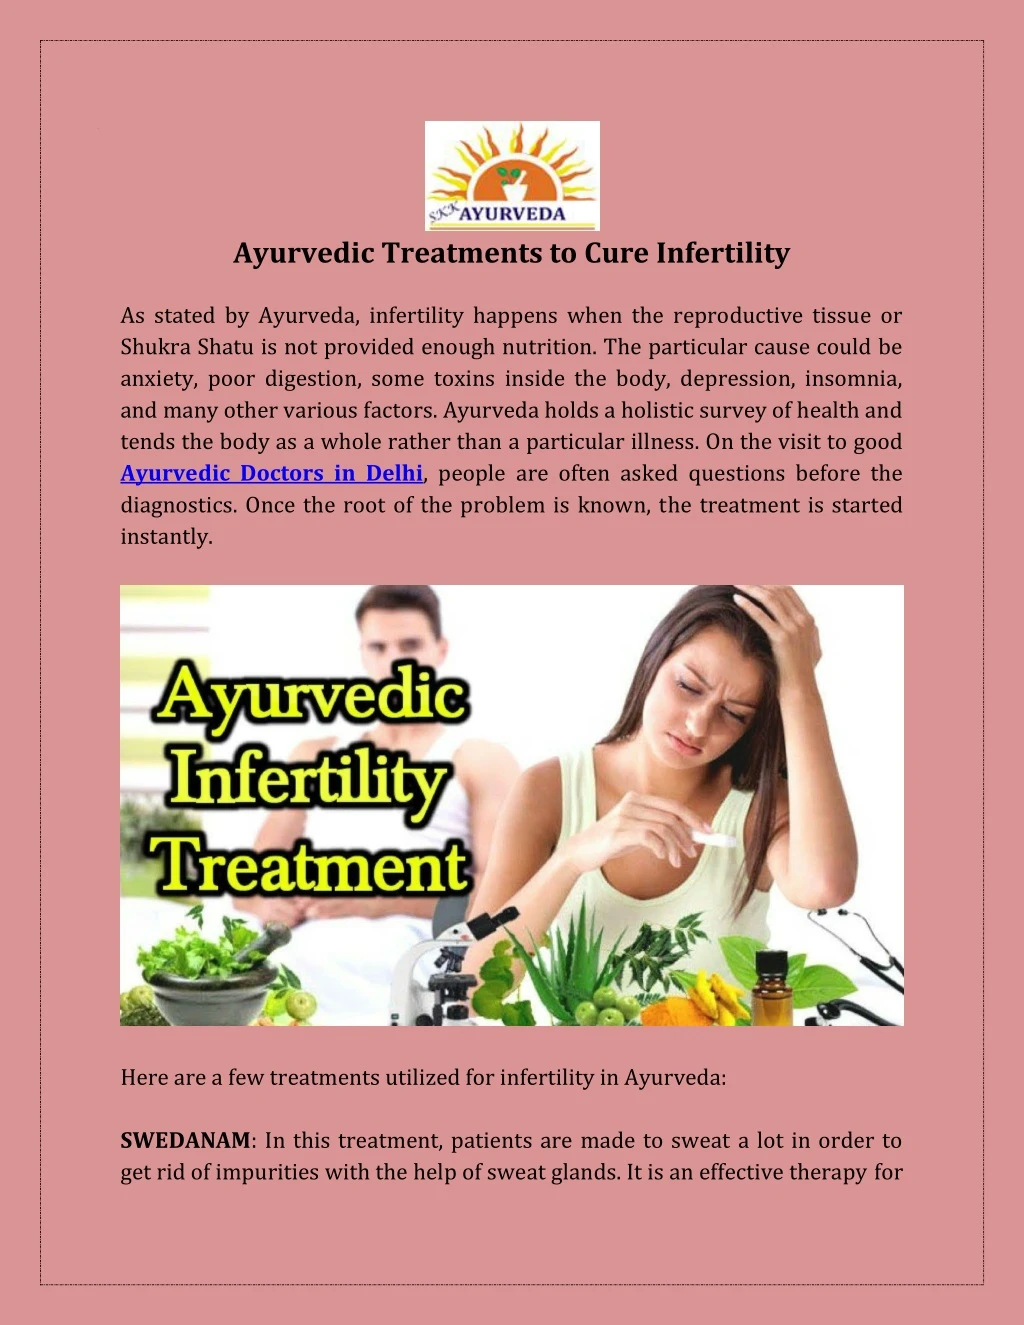 ayurvedic treatments to cure infertility